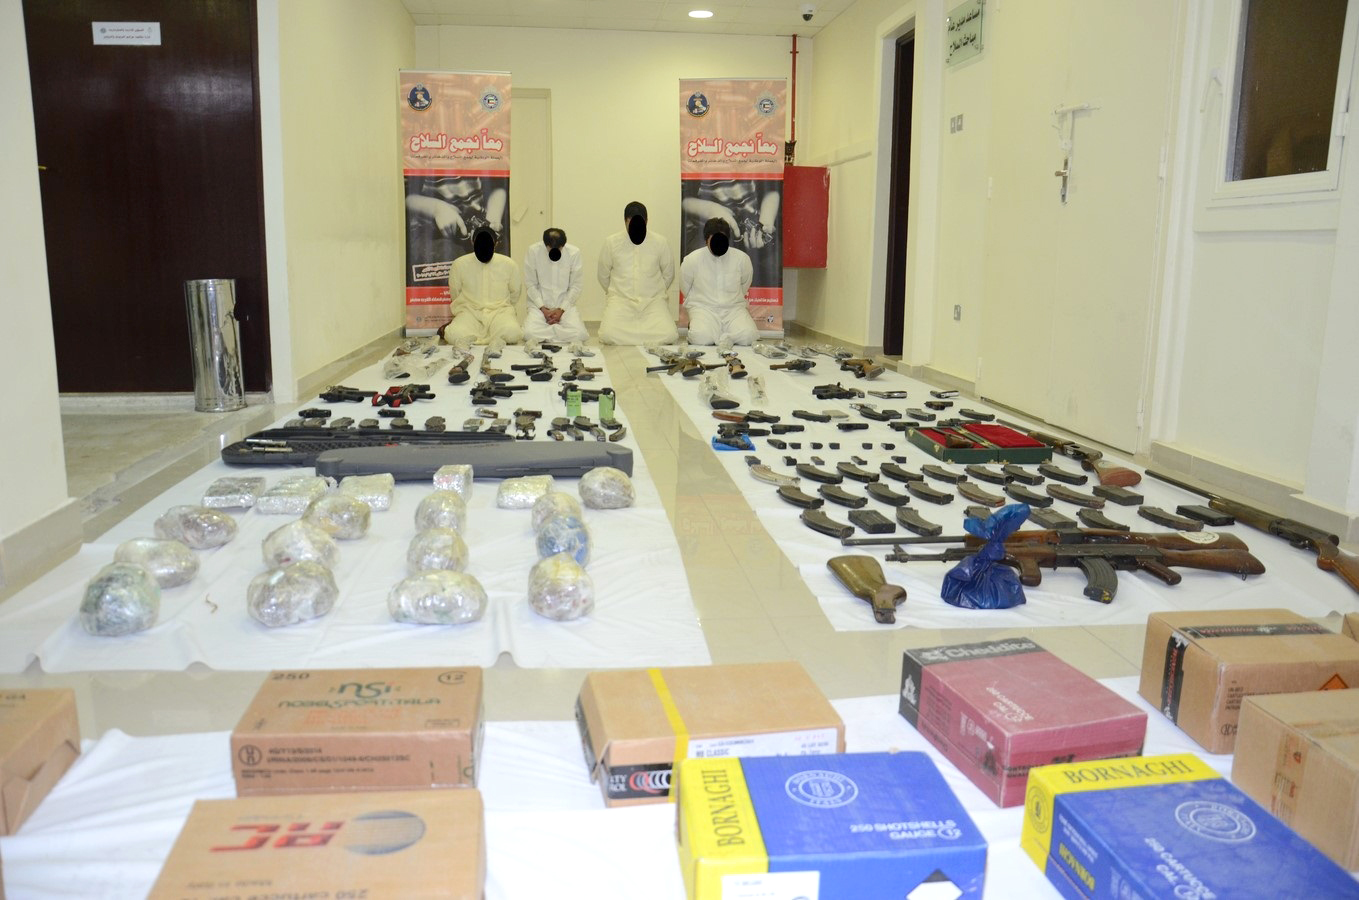 Seized Citizens and unlicensed, illegal weapons